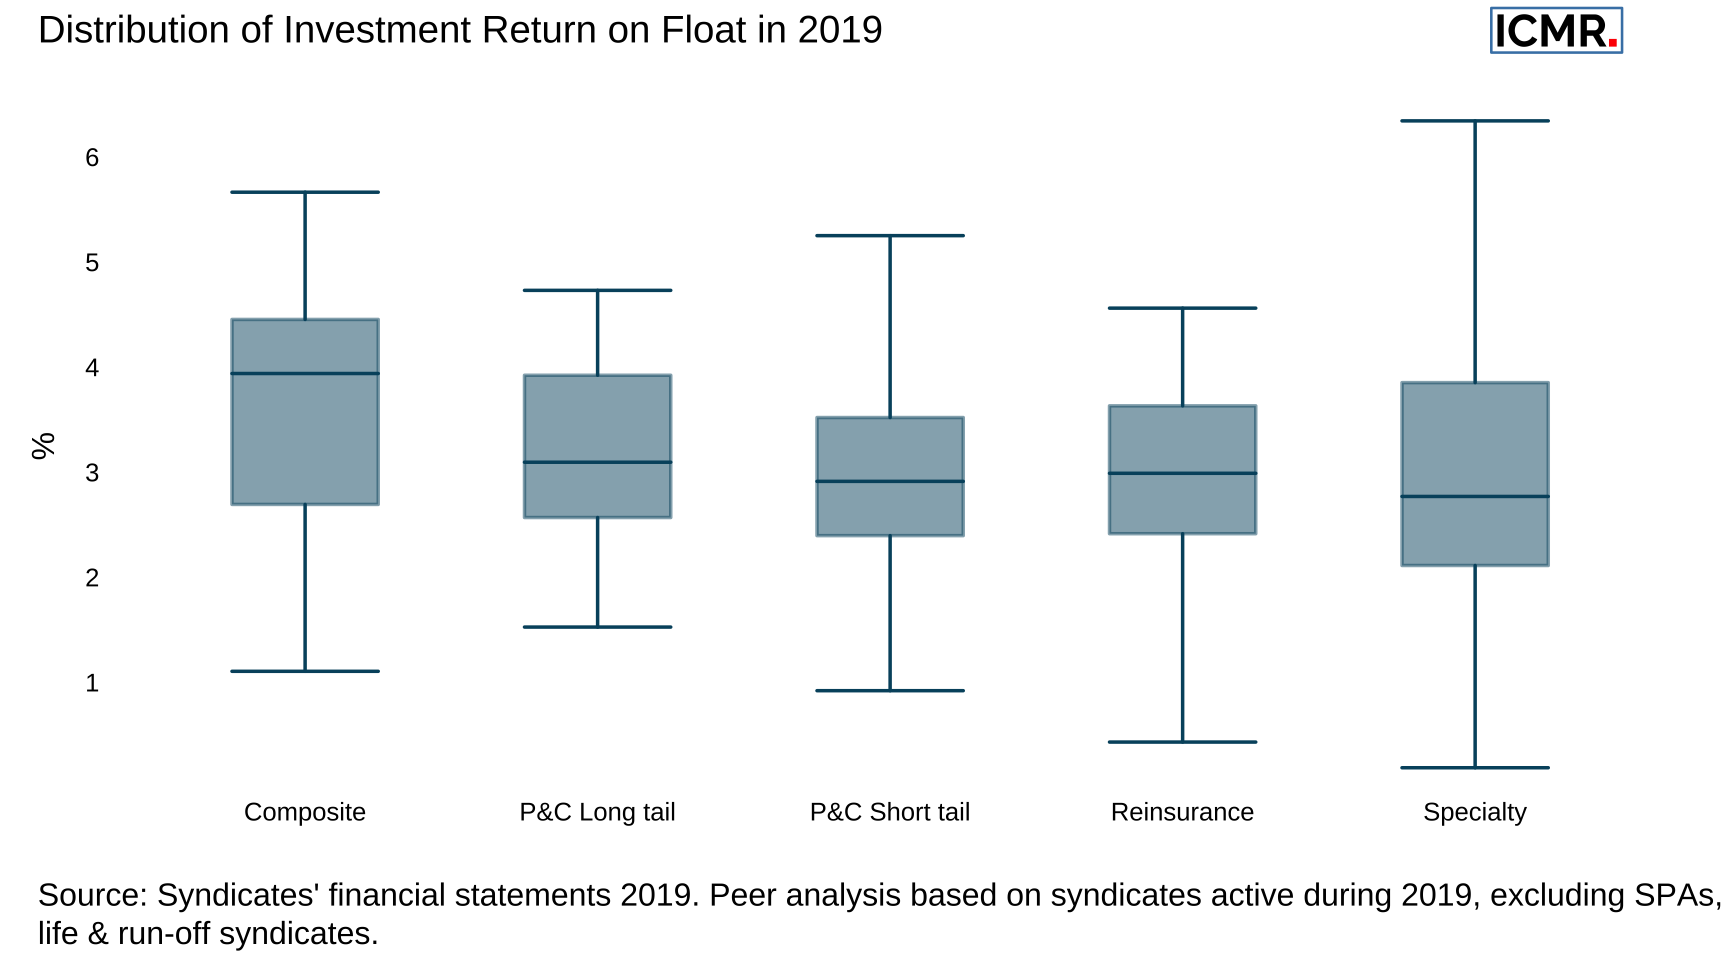 Box-whisker plot of distributions of syndicate investment returns by peer group in 2019. The box represents the inter-quartile range of returns, with the median higlighted as a horizontal line. The whiskers extend to the minimum and maximum of reported investment returns.